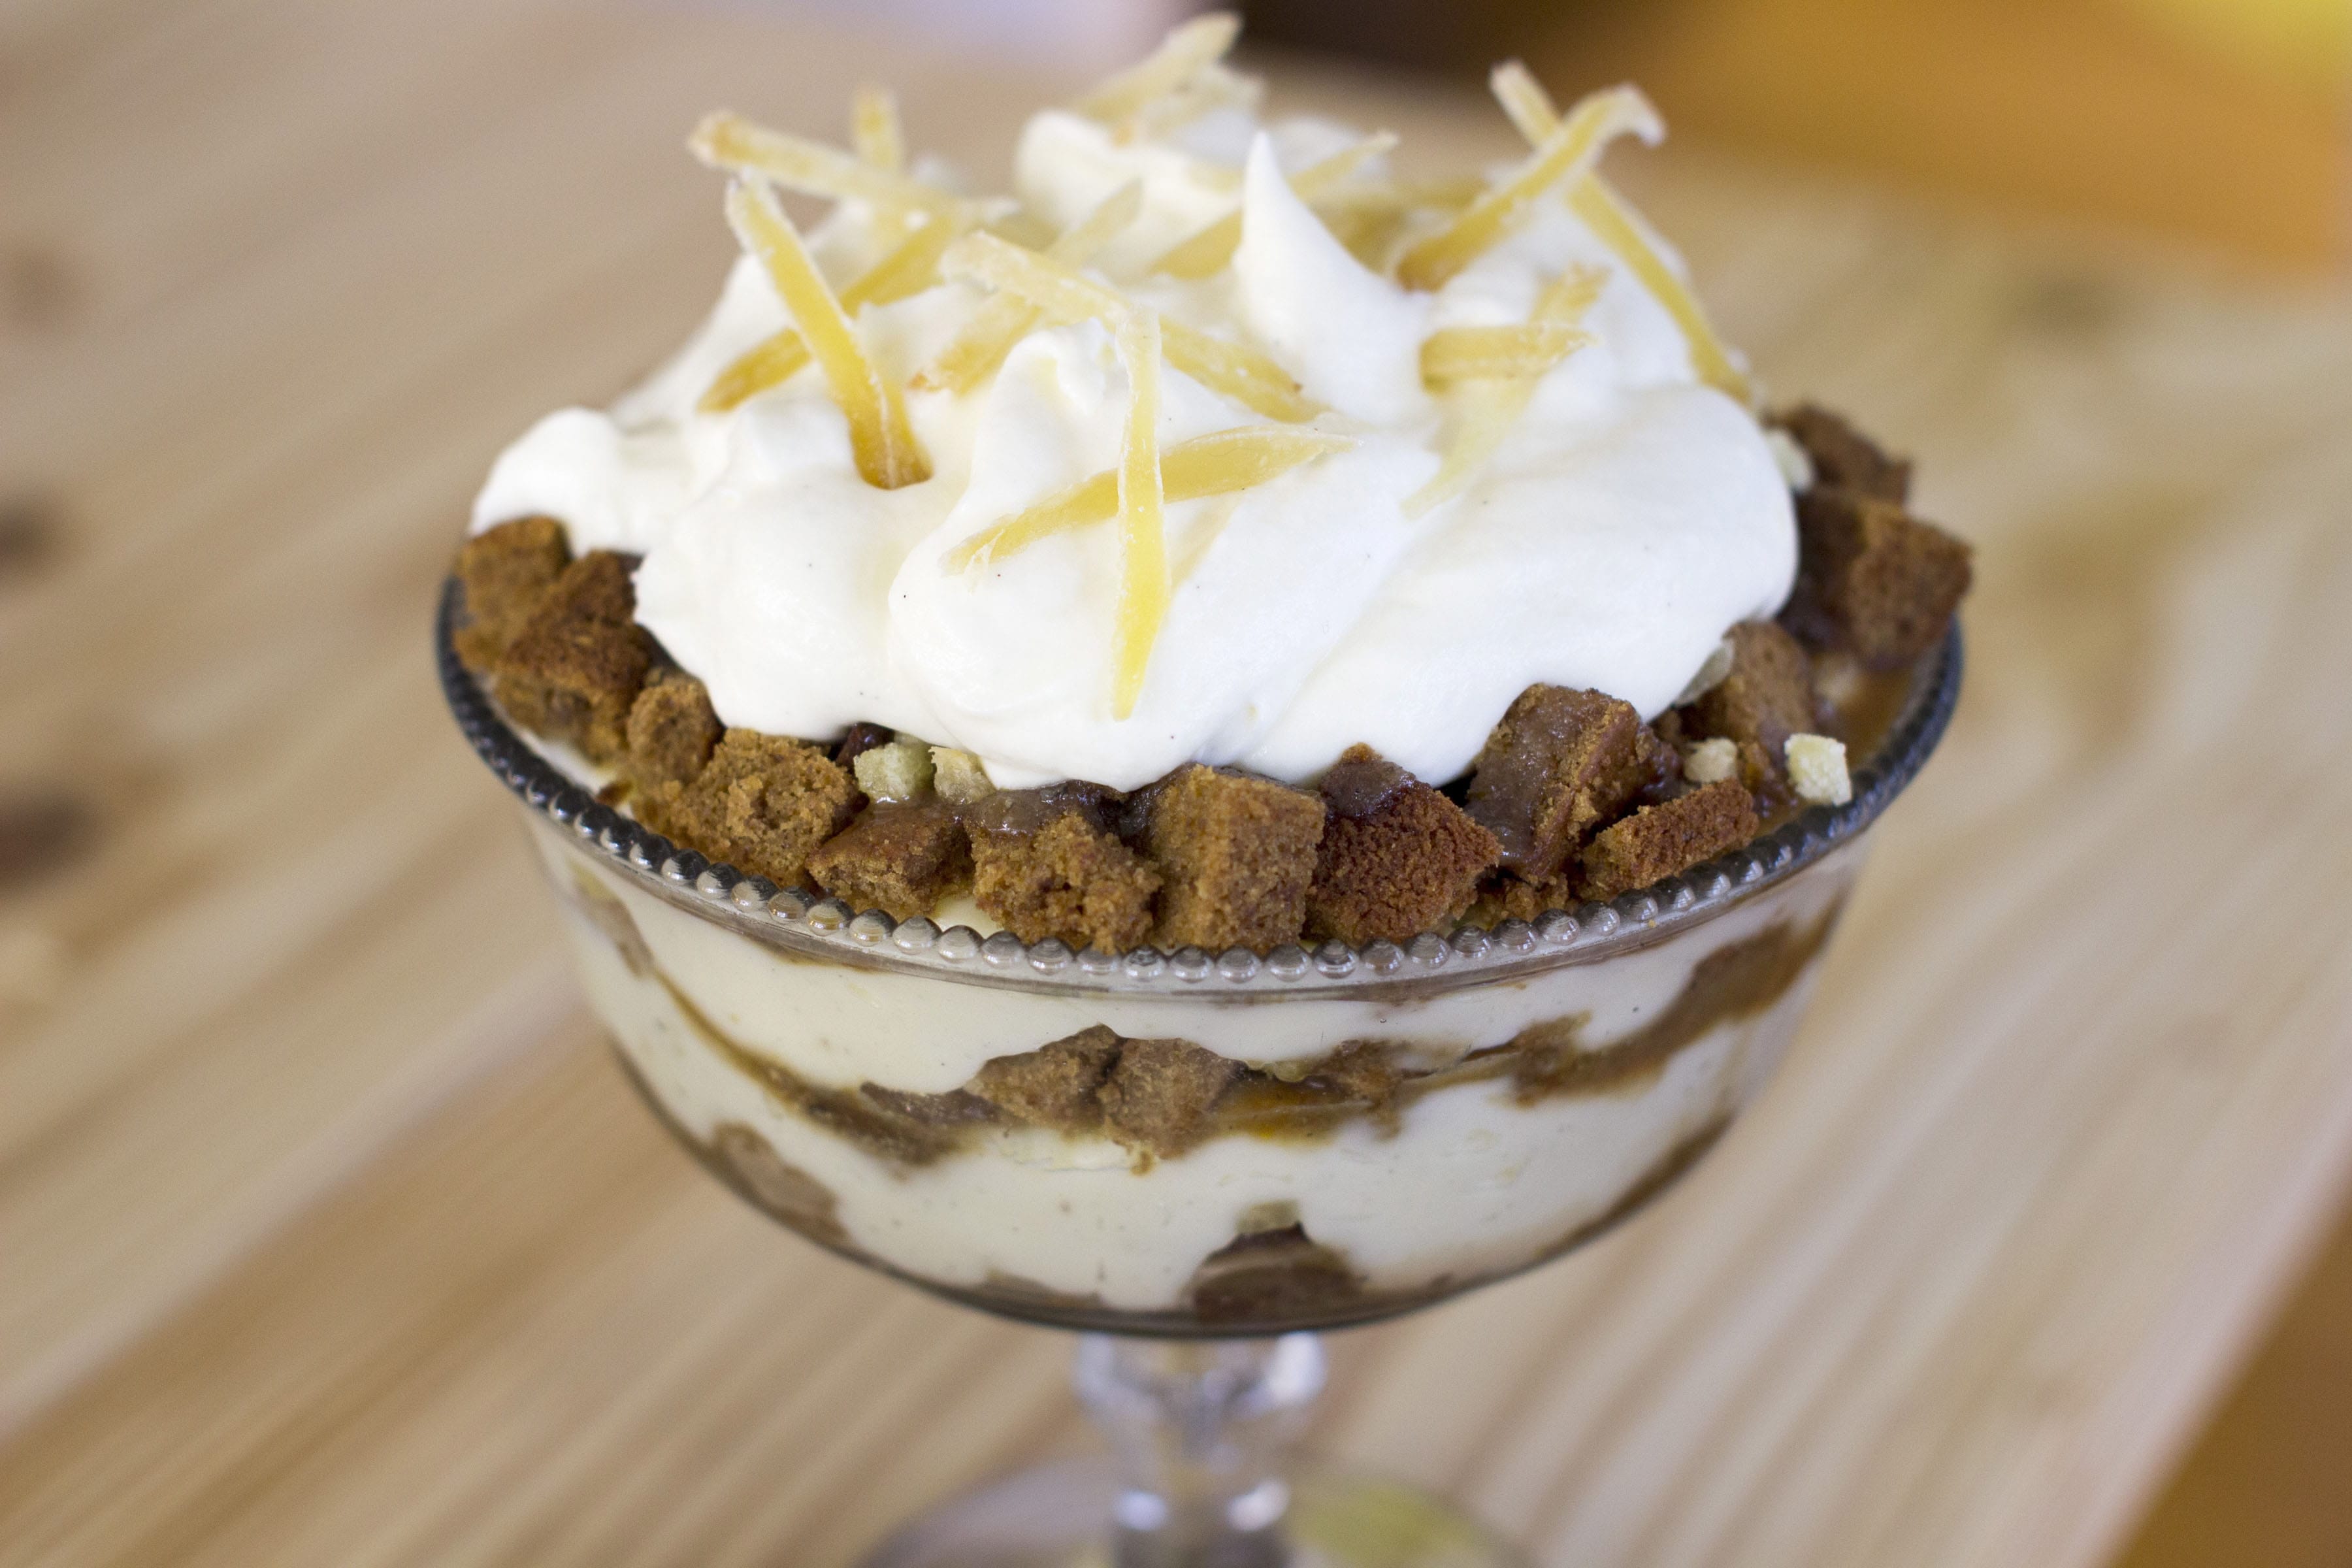 This trifle captures the iconic flavor, and aroma, of Christmas: gingerbread.